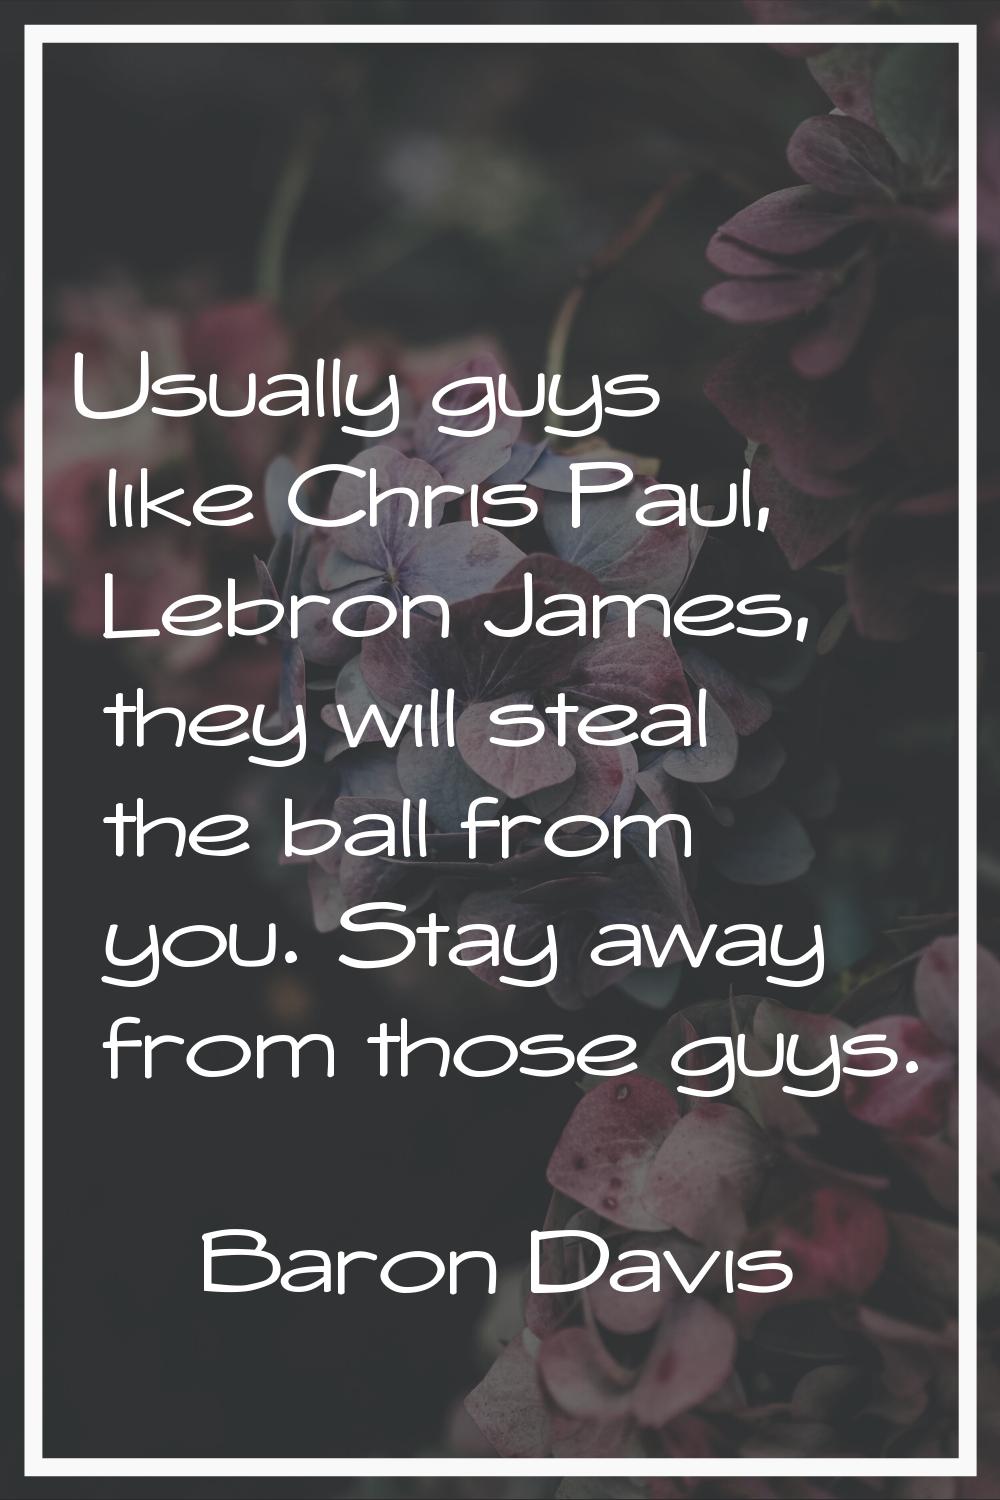 Usually guys like Chris Paul, Lebron James, they will steal the ball from you. Stay away from those